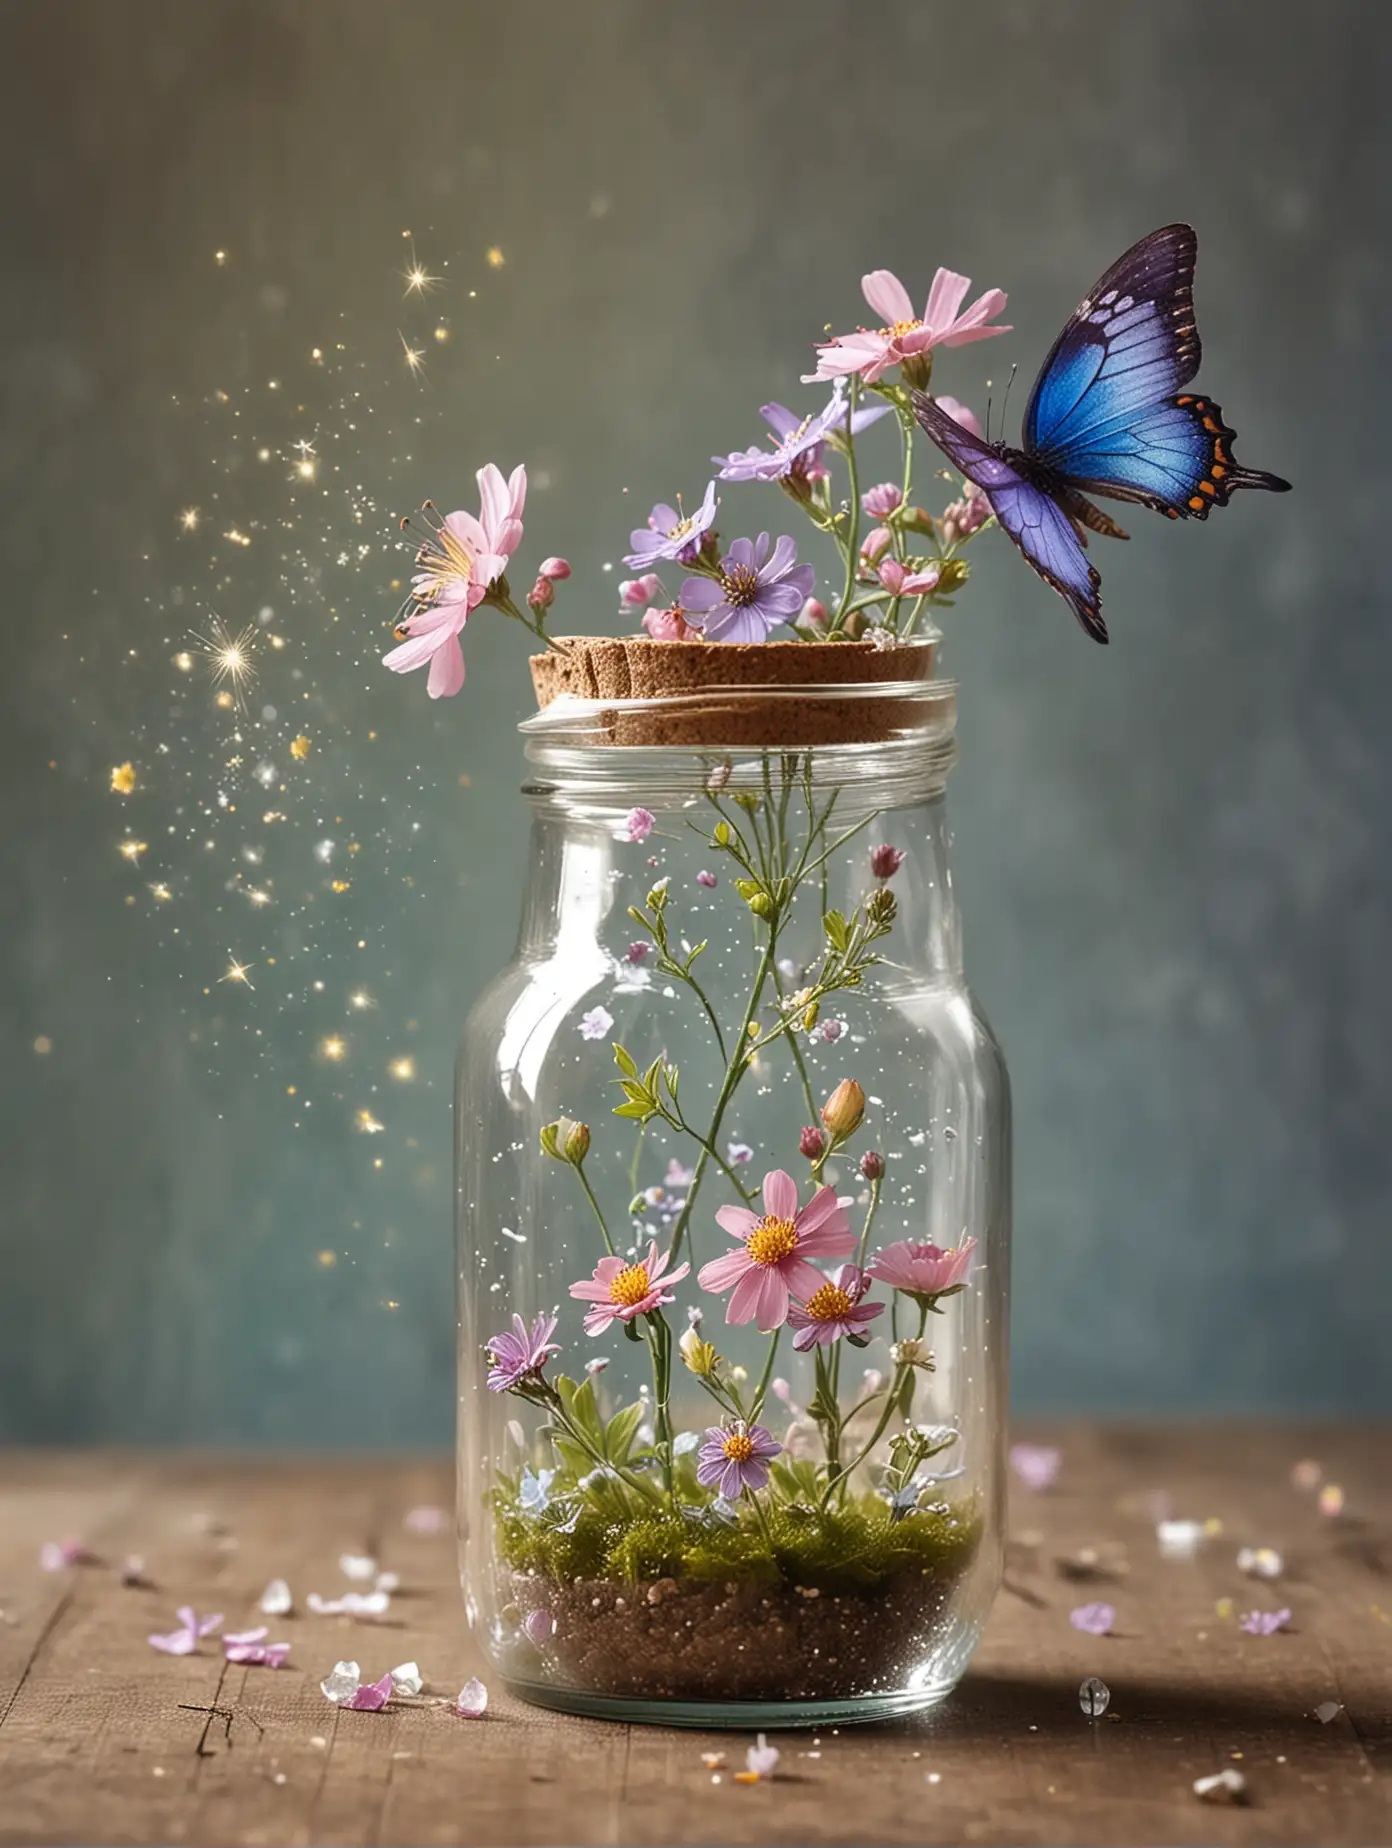 little glass jar looking alchymistic and spreading magical butterflie and sparkling flowers out of it